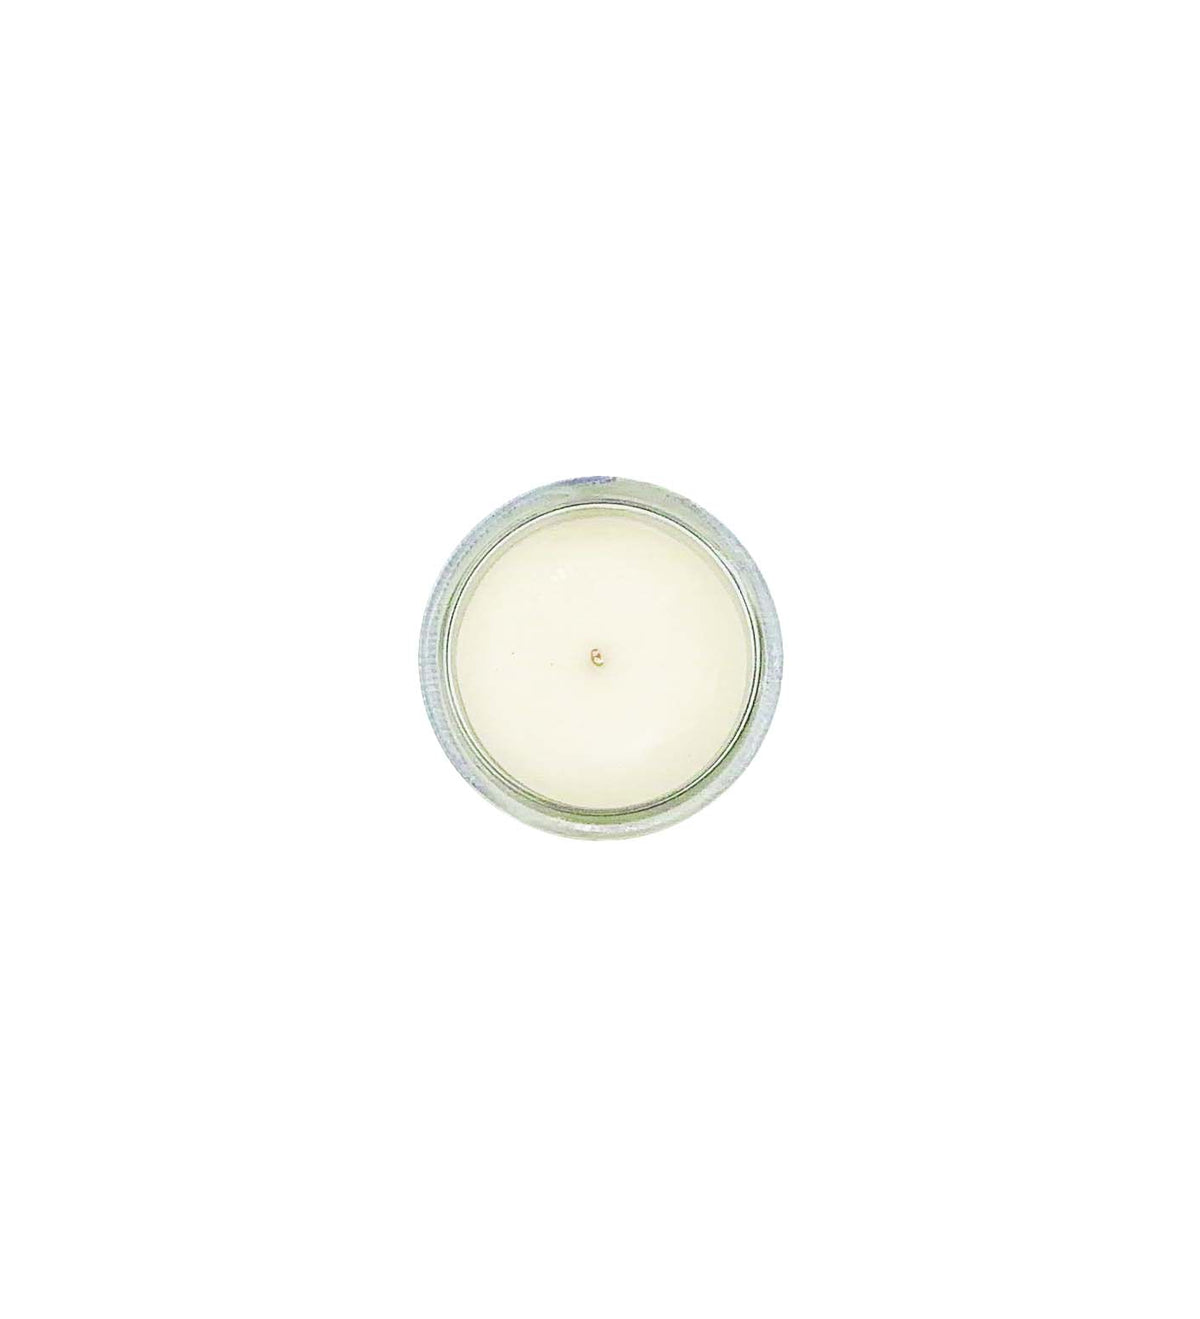 HERMITAGE SMALL CANDLE